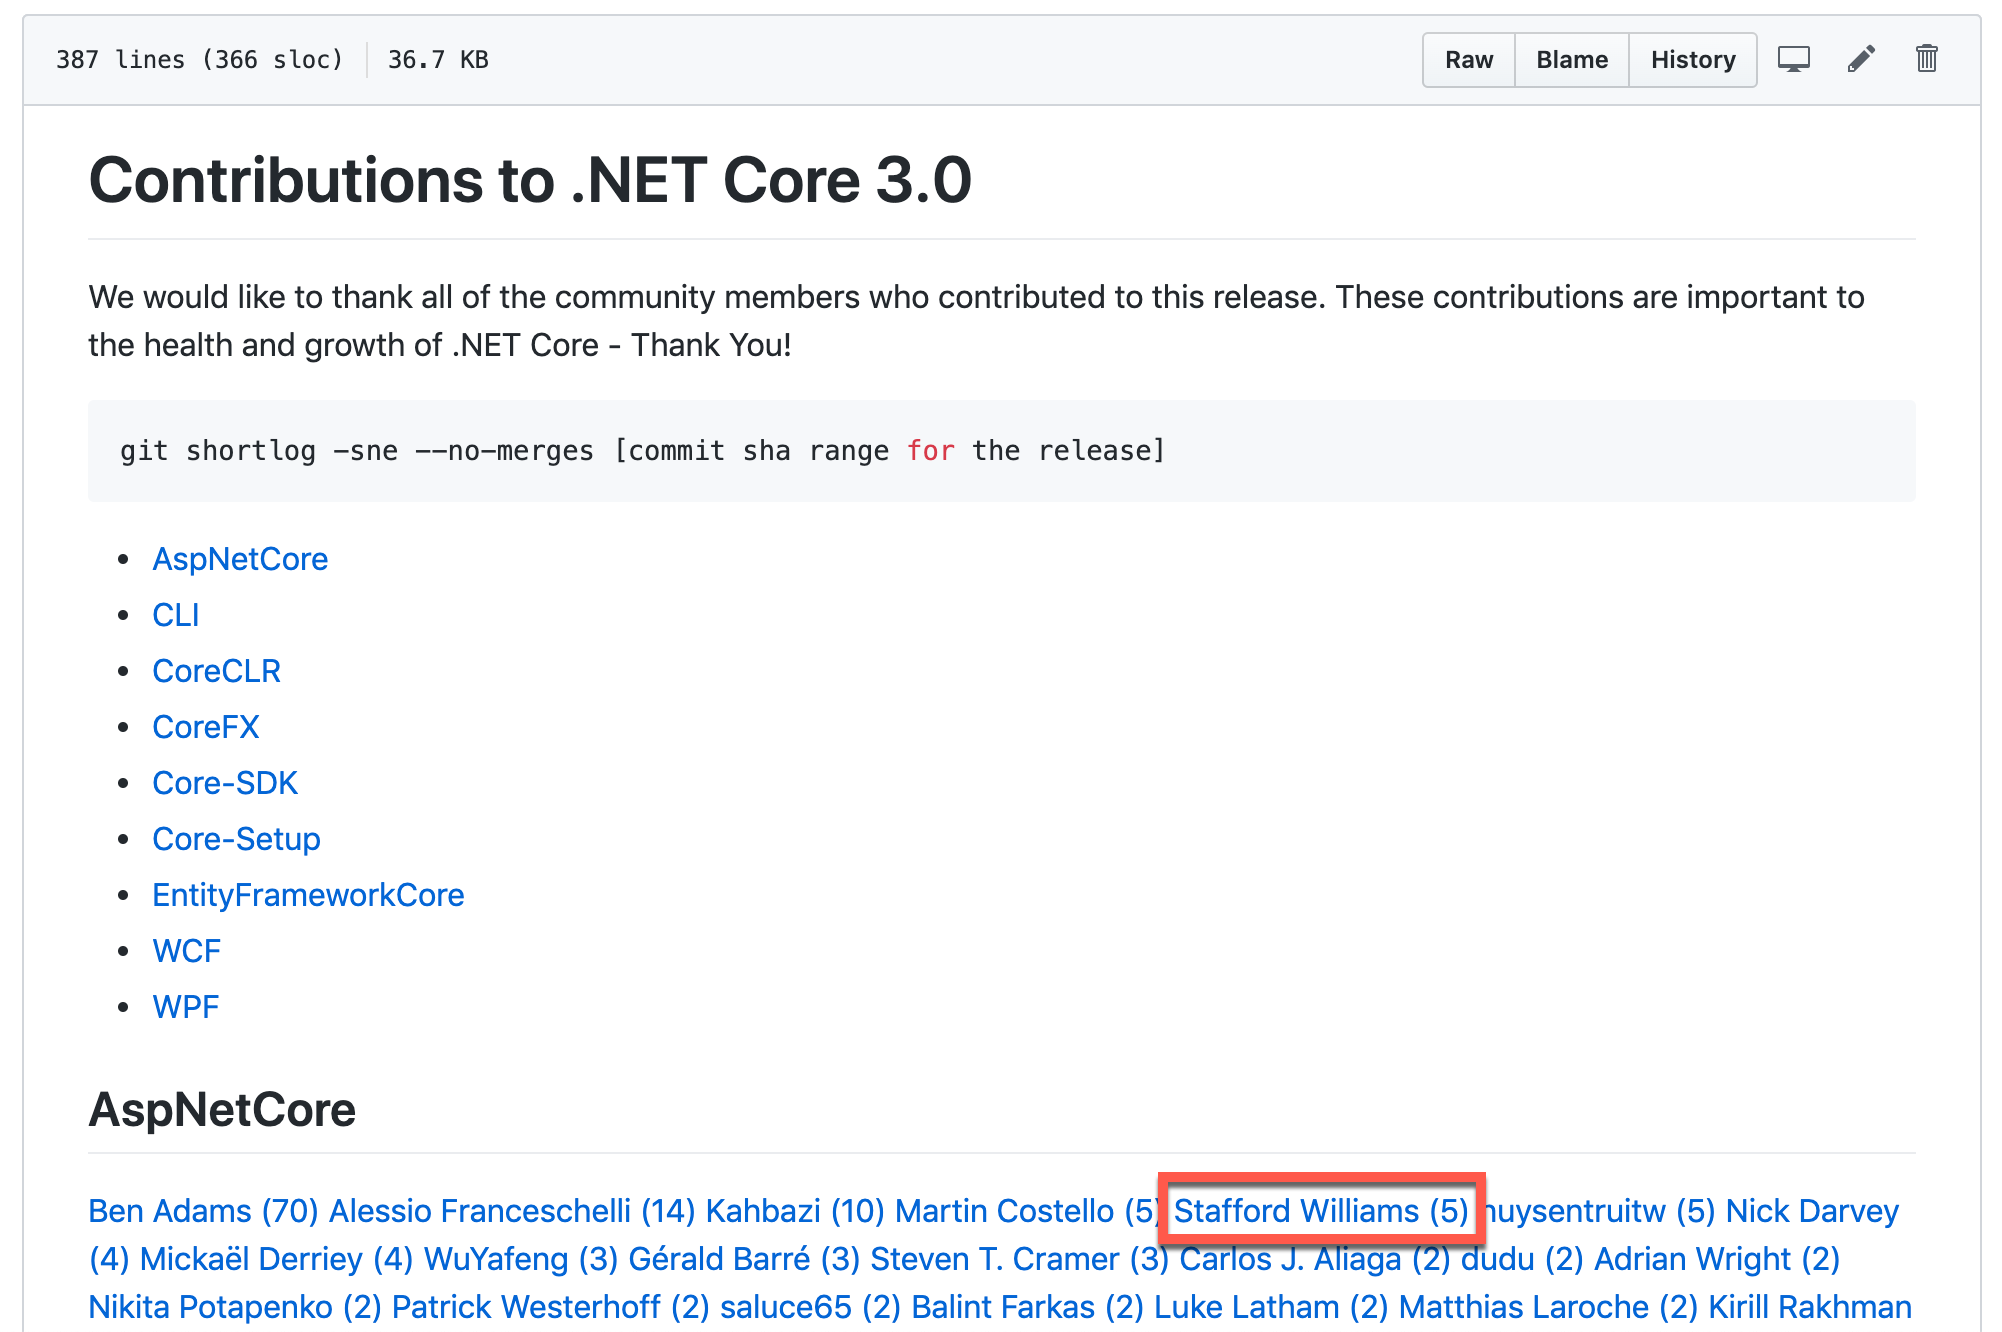 My contributions to .NET Core 3.0